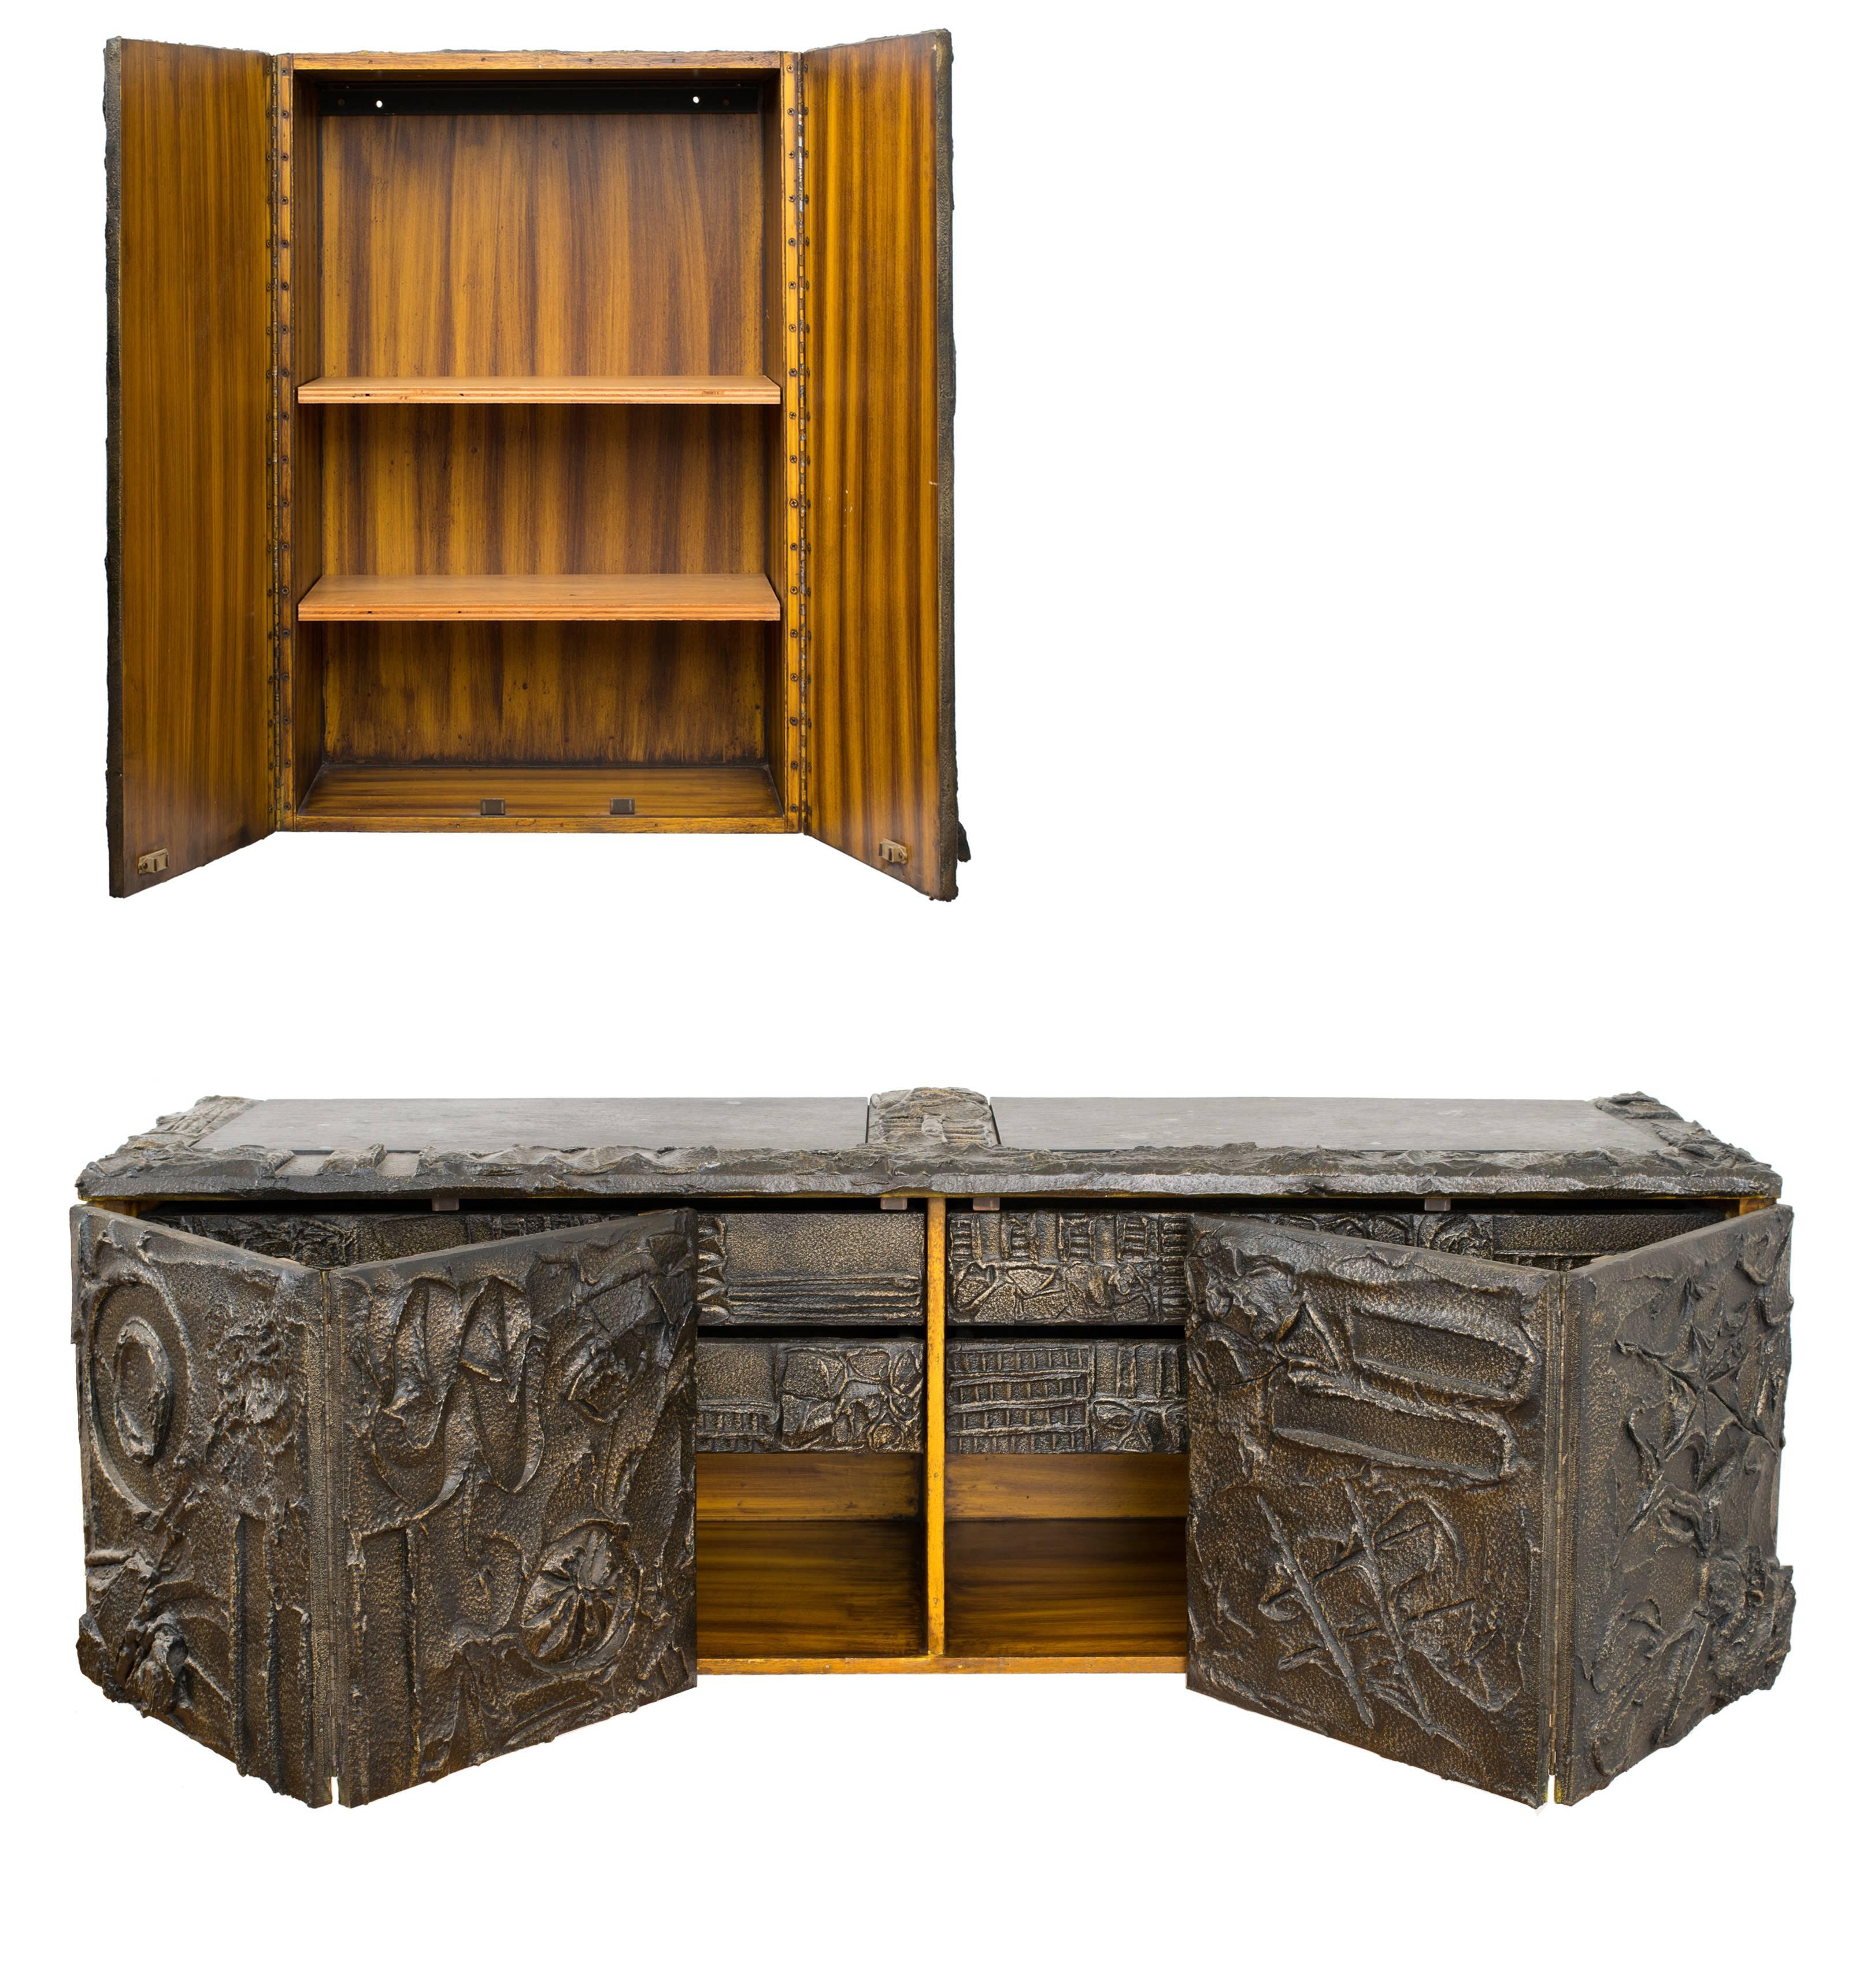 * cabinets also available individually. Please inquire with Satyricon.

A gorgeous, matched pair of wall-mount cabinets by Paul Evans, 1971, executed in hand-sculptured bronze resin with dramatic, deeply incised designs throughout. 

The floating